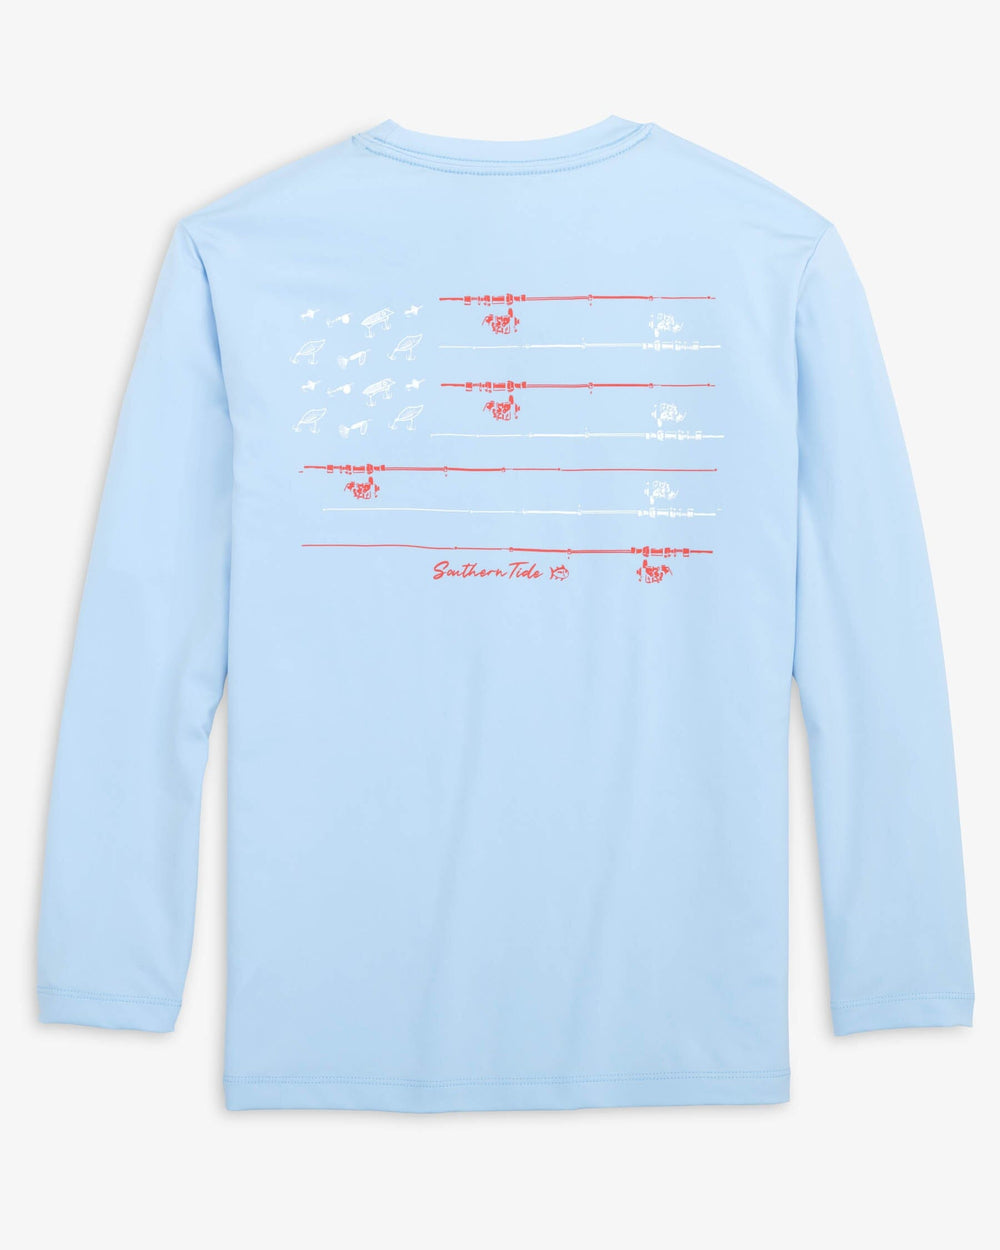 Southern Tide Kids Red, White, and Lure Long Sleeve Performance T-Shirt Blue (Size S) 92% Polyester 8% Spandex